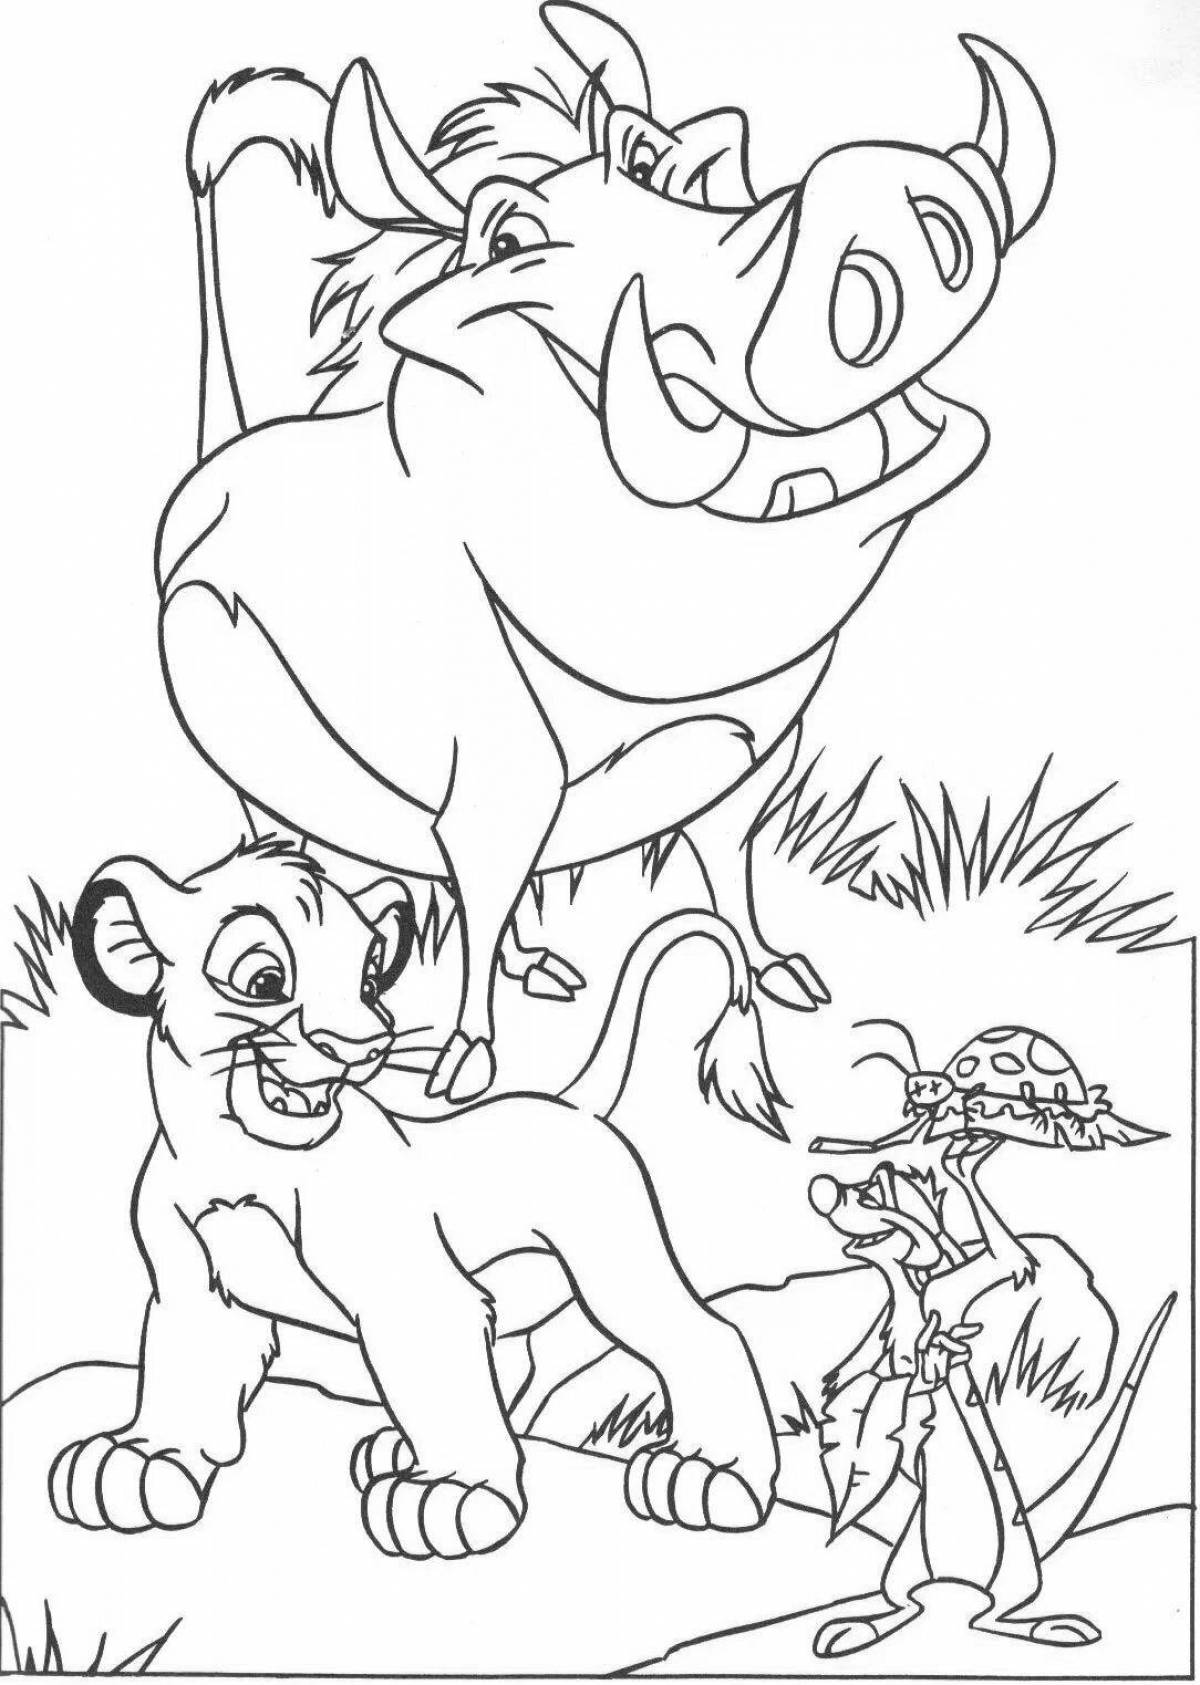 Live lion king coloring page for kids